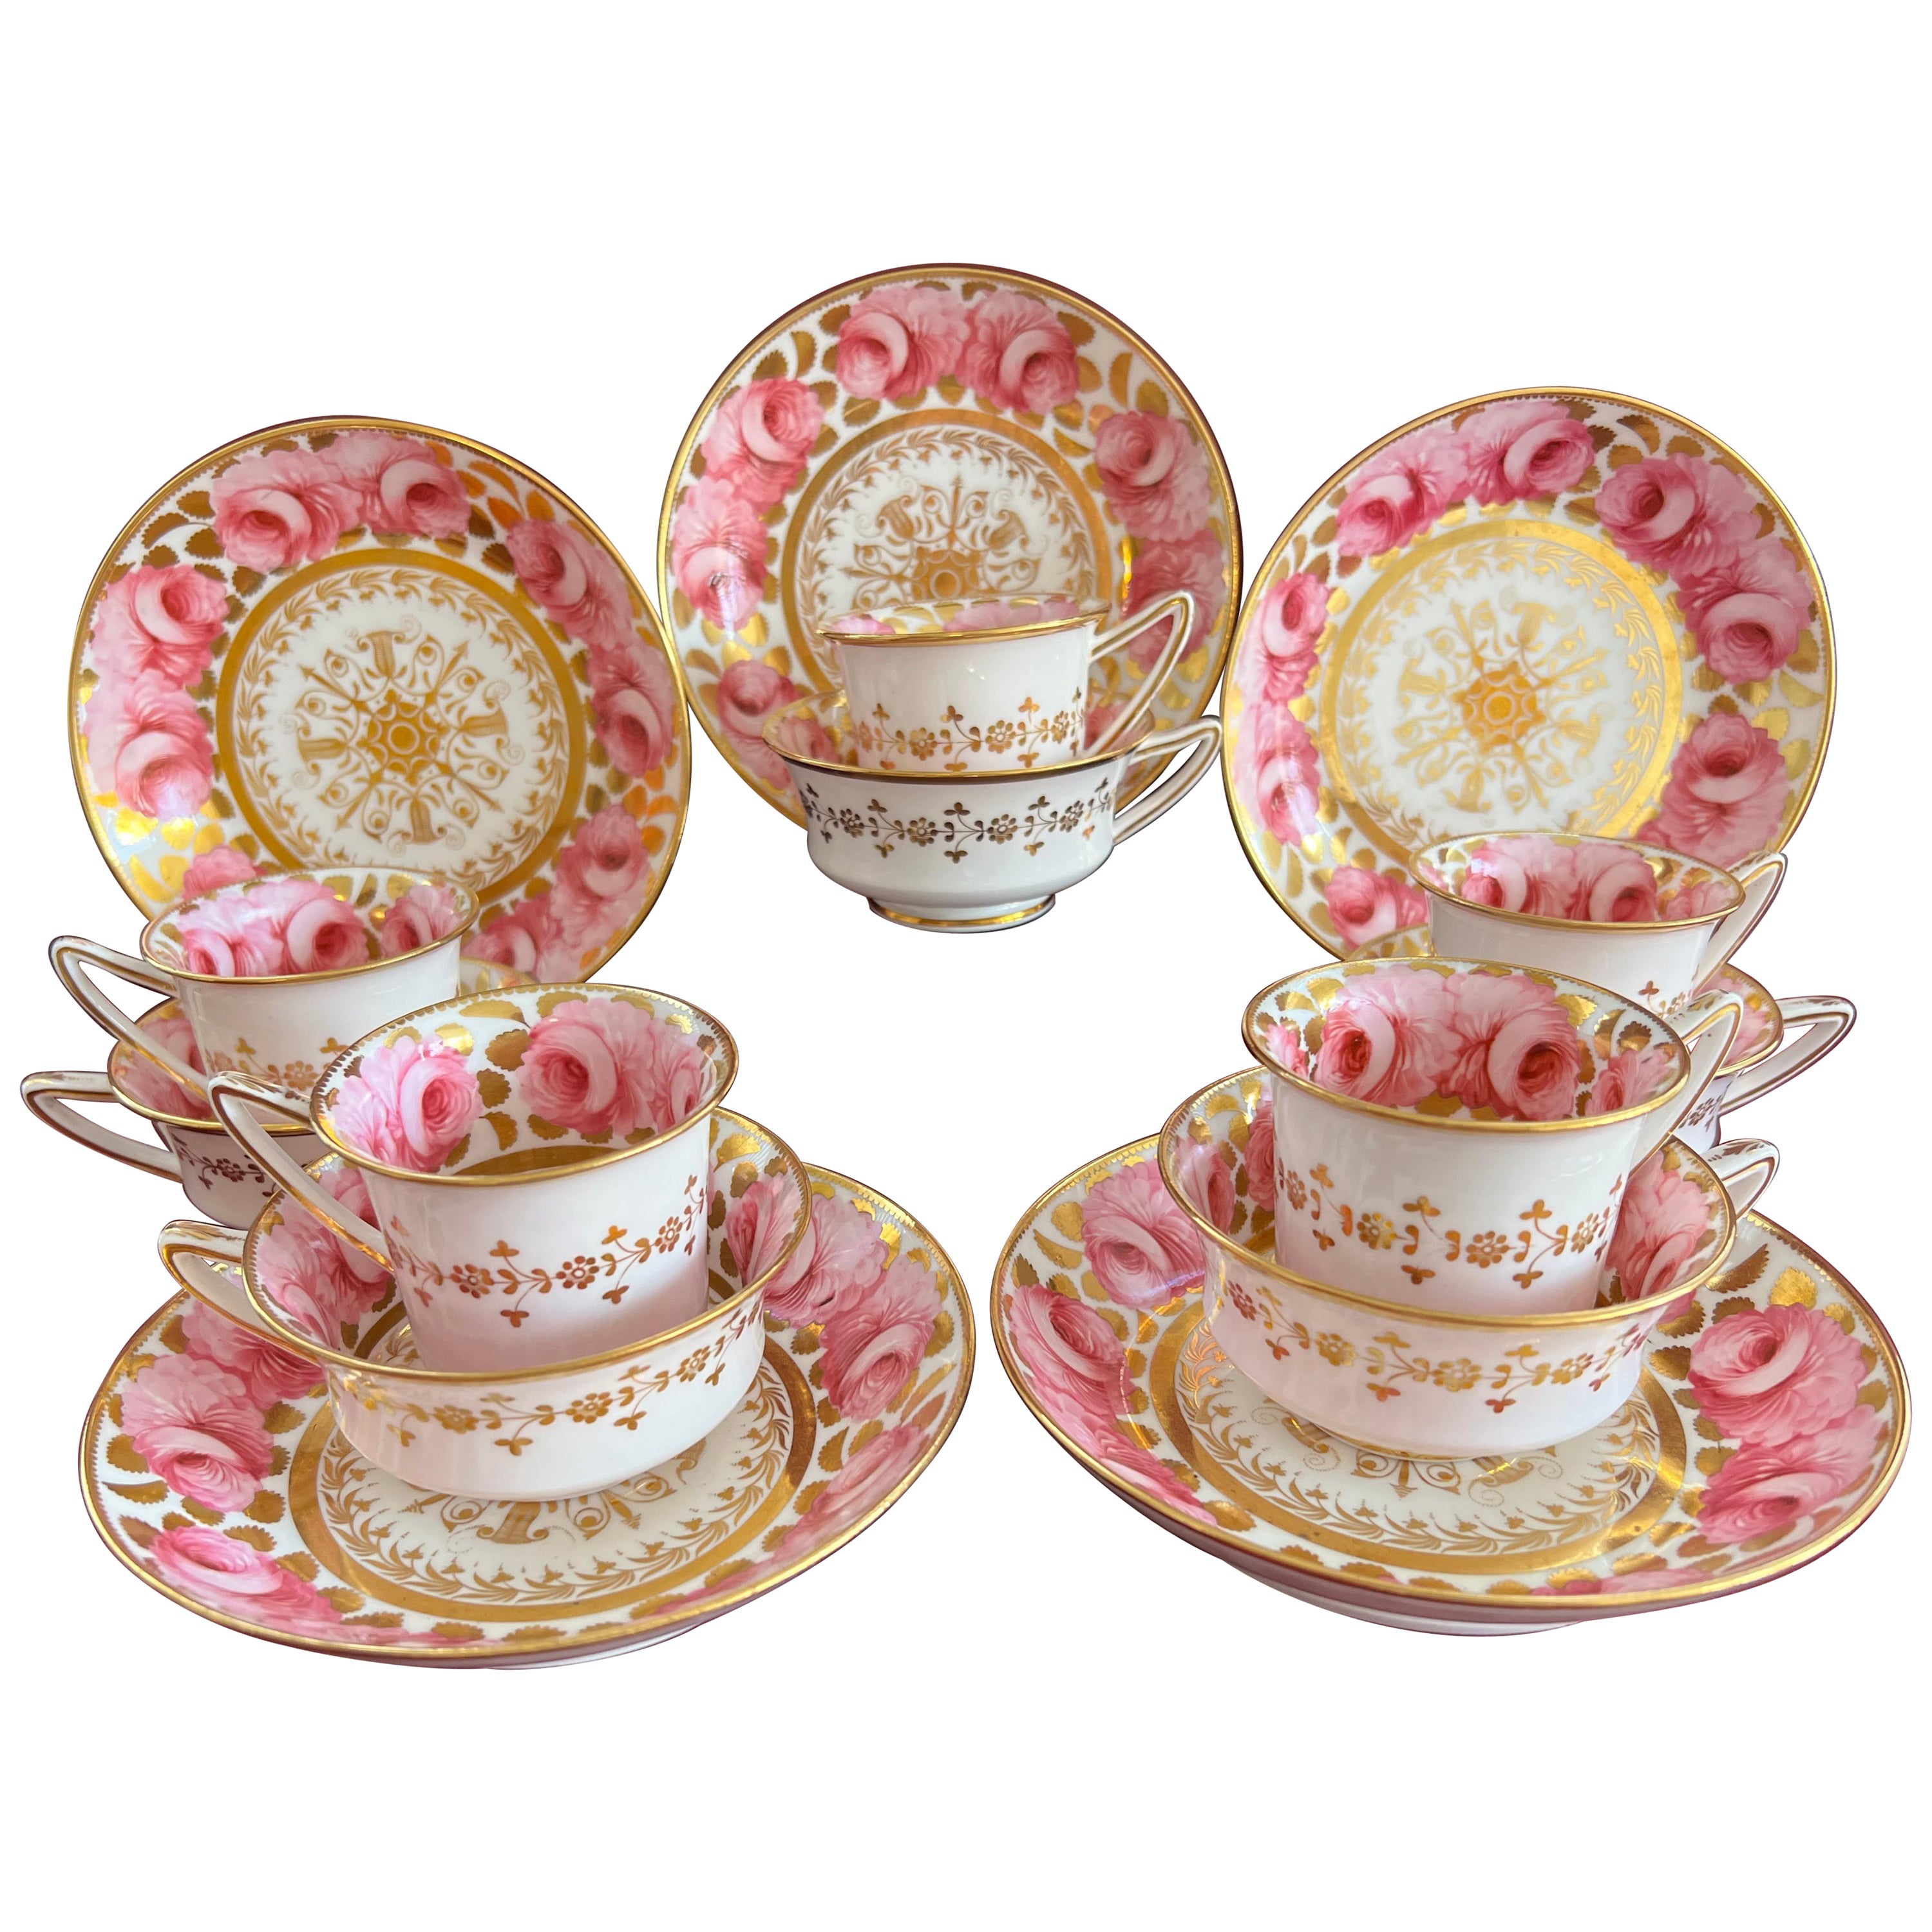 Five Spode Porcelain Trio's Decorated in Pattern 3614, circa 1822 For Sale